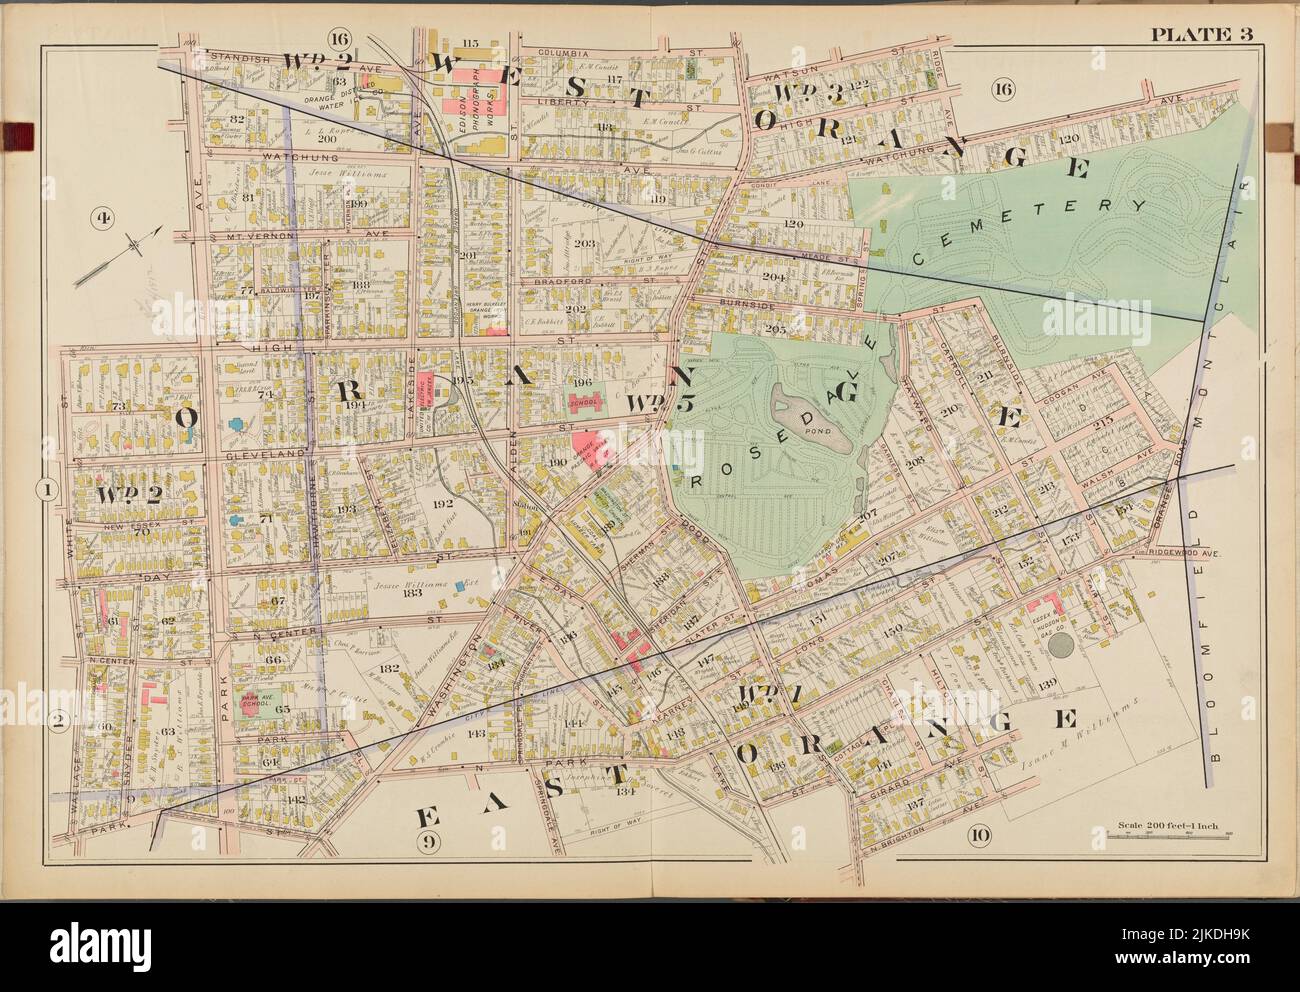 West Orange, Orange, East Orange. Double Page Plate No. 3 [Map bounded by Columbia St., Watson St., Orange Rd., N. Brighton Ave., Park St., Wallace Stock Photo